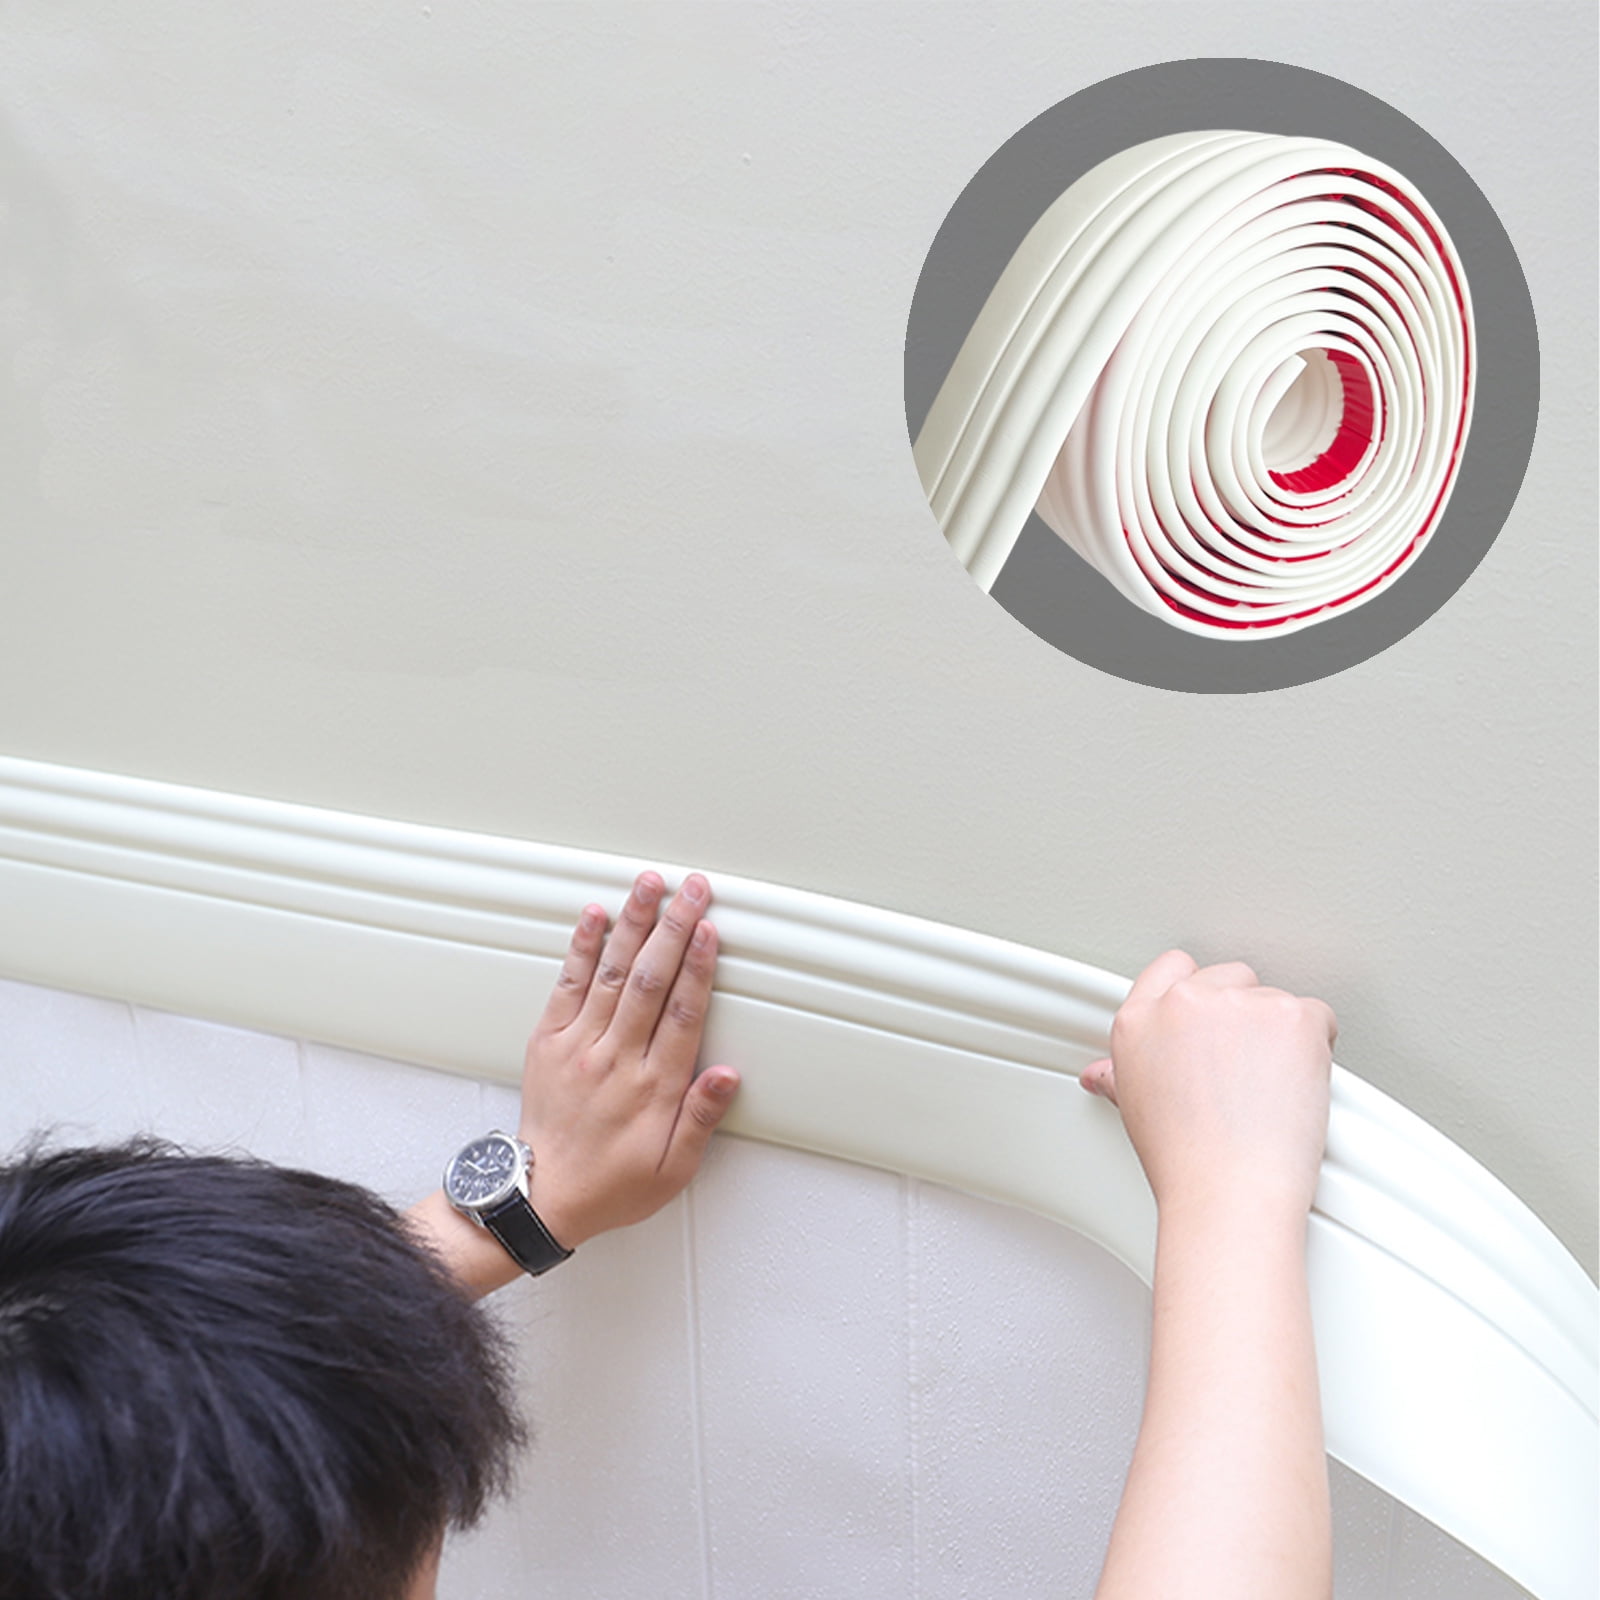 Gaahing Paintable Baseboard Trim | Peel and Stick Self-Adhesive Design Vinyl Wall Base | Caulk and Trim Strips for Floor, Chair Rail and More, 16.4 ft